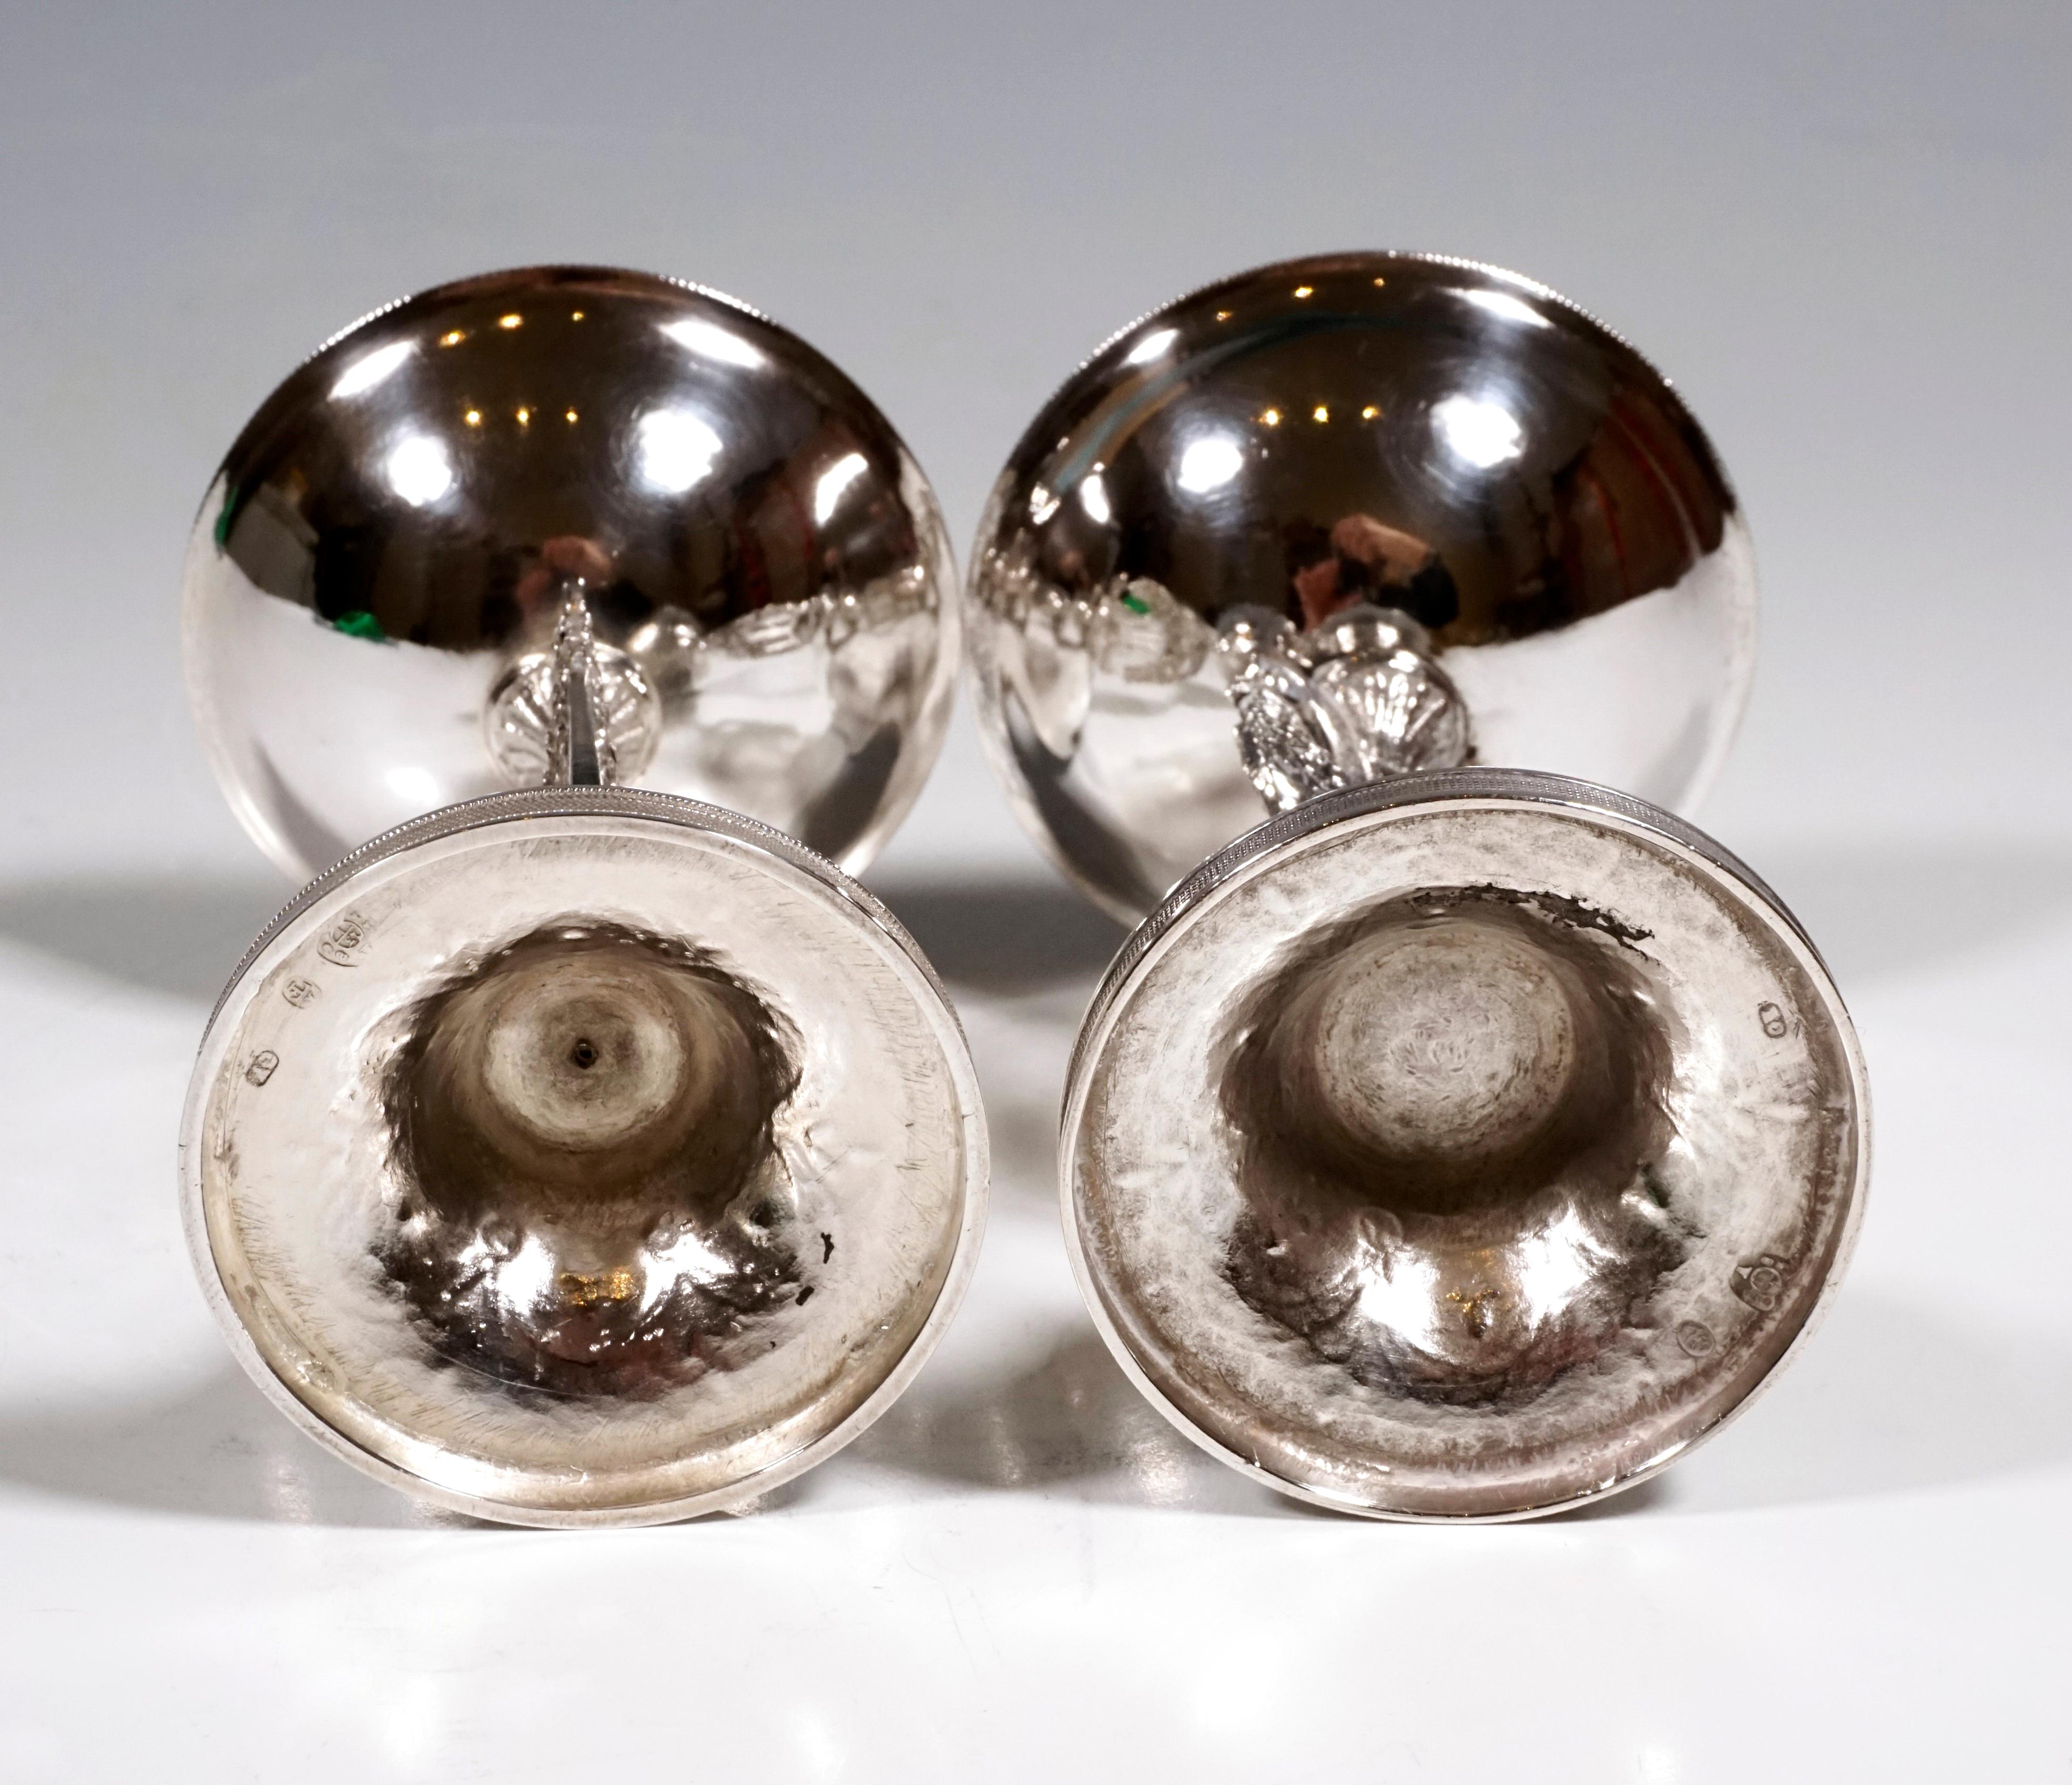 Hand-Crafted Pair Of Antique Vienna Silver Empire Spice Bowls by Georg Kohlmayer, ca. 1815